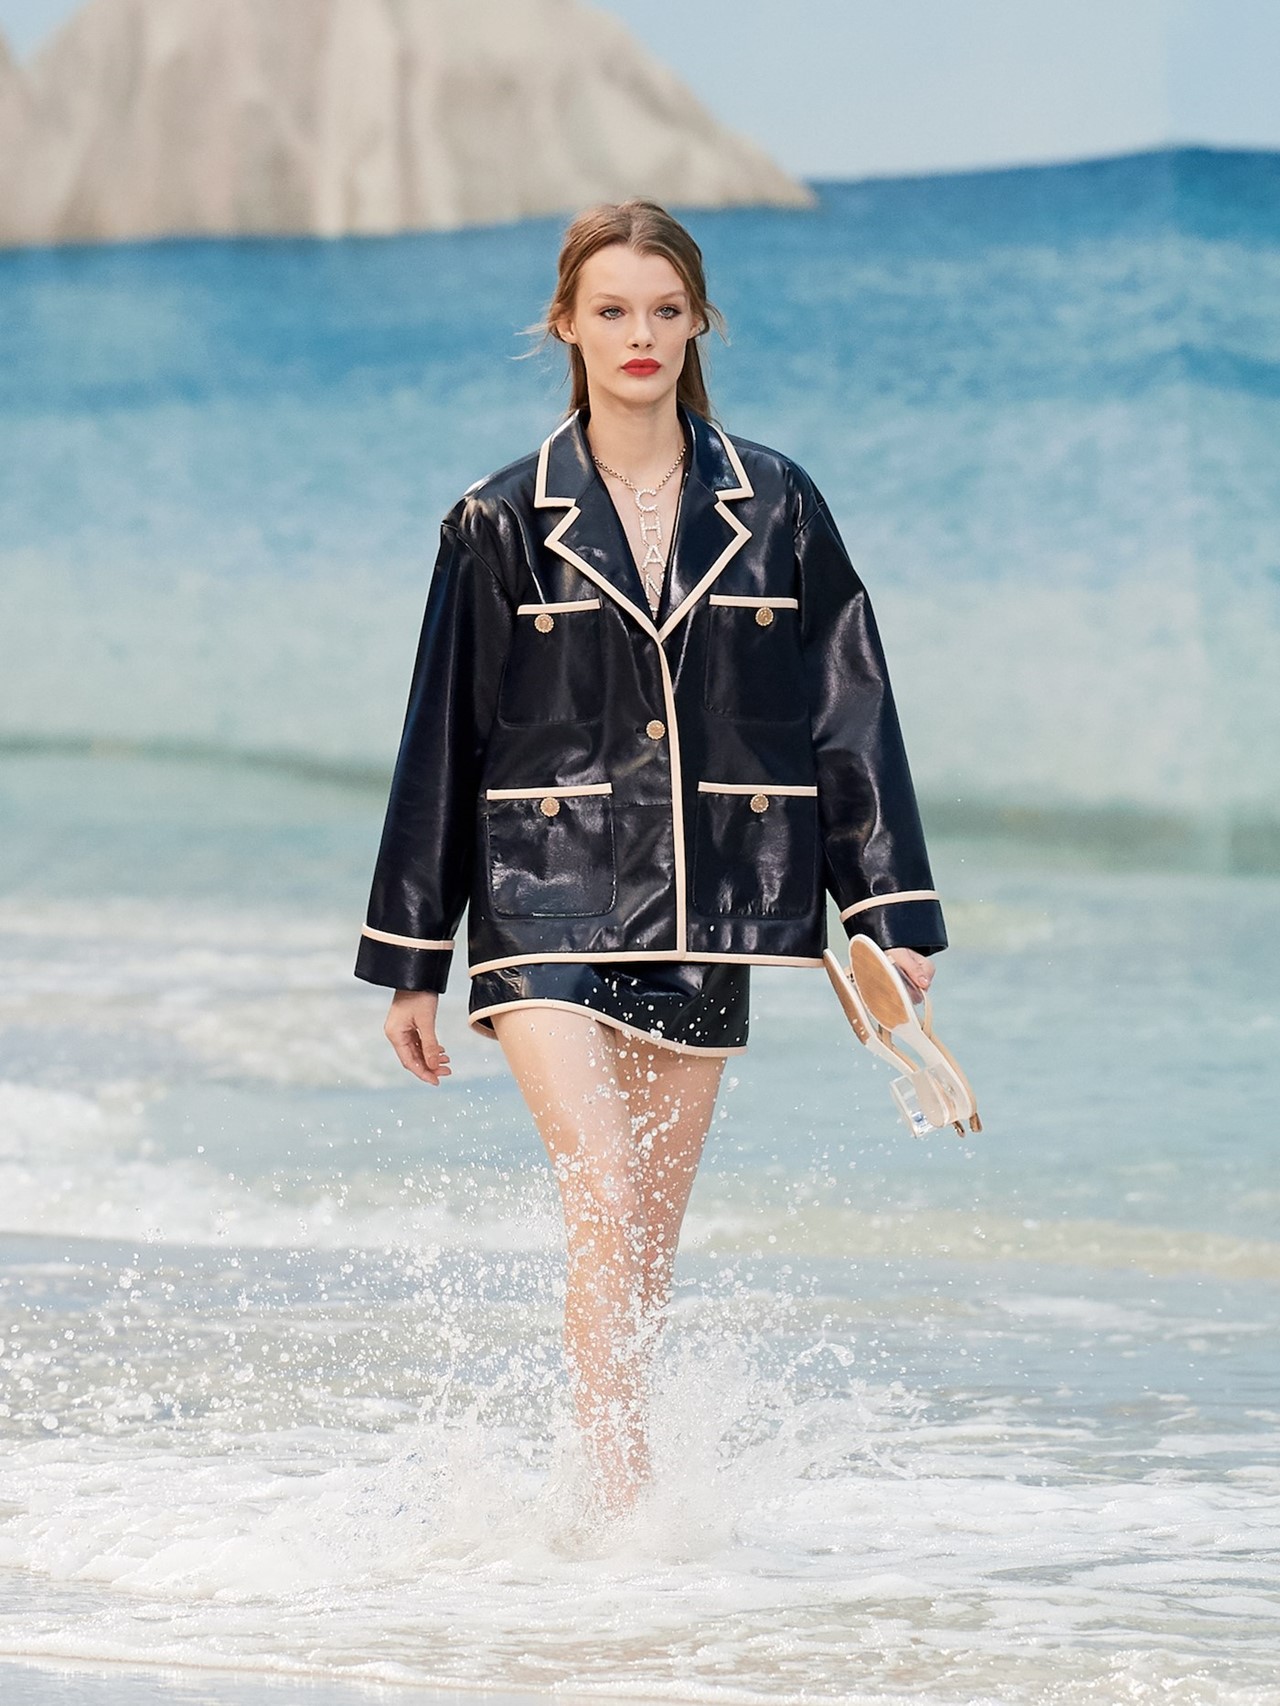 Life Really Is a Beach at Chanel's Spring 2019 Spectacular - Fashionista